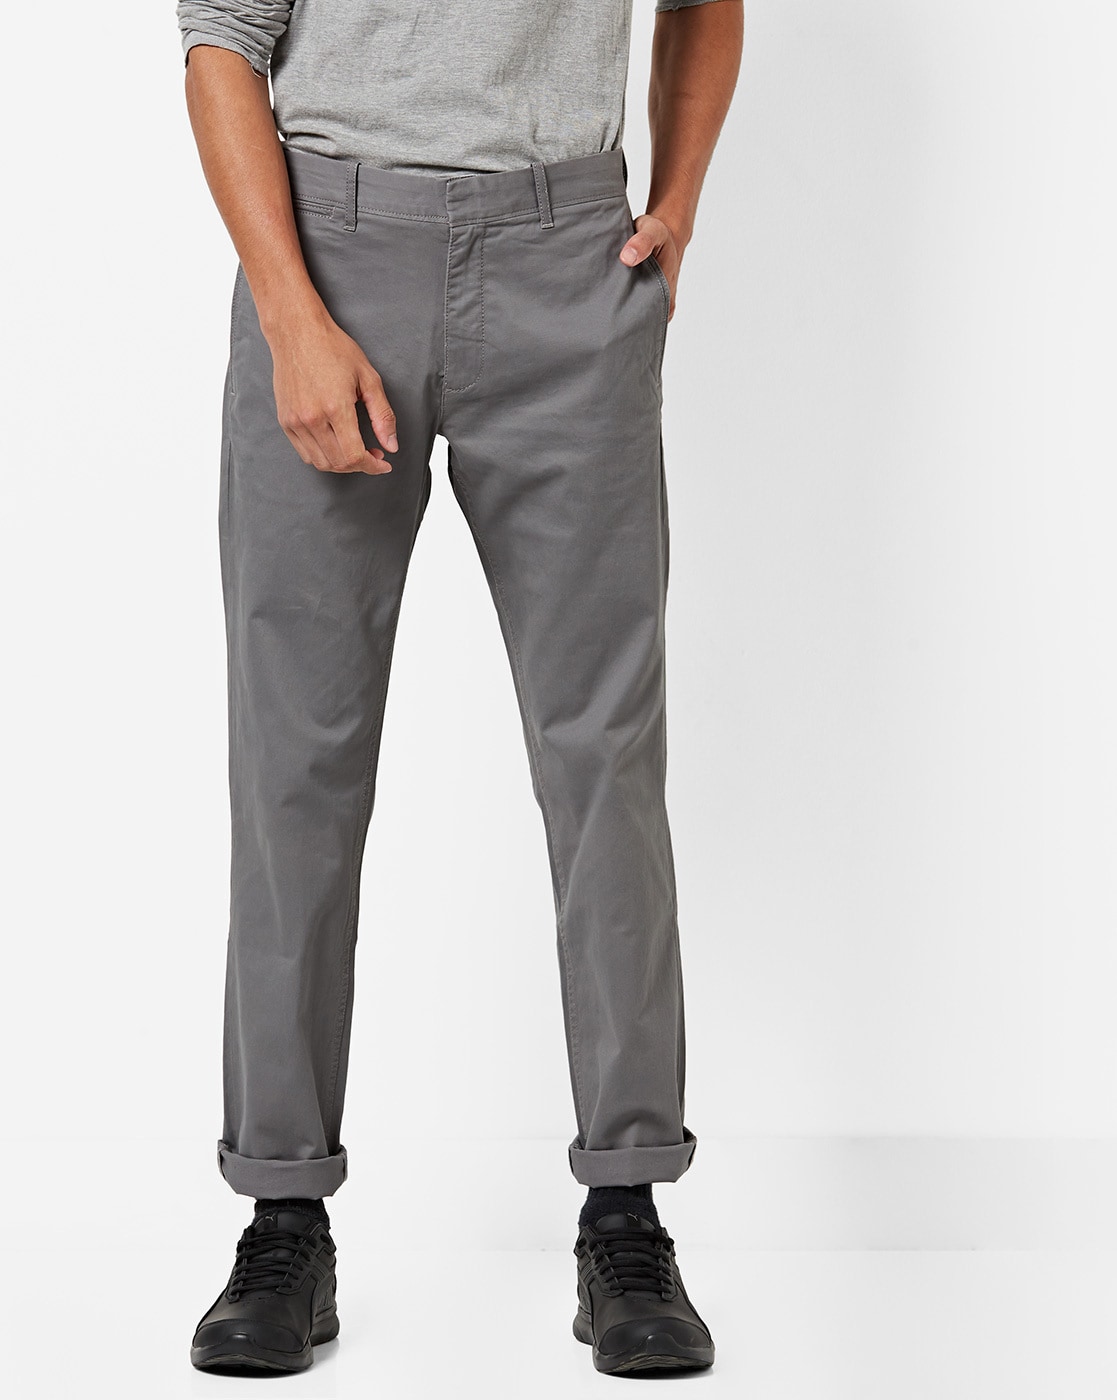 Grey Trousers \u0026 Pants for Men by LEVIS 